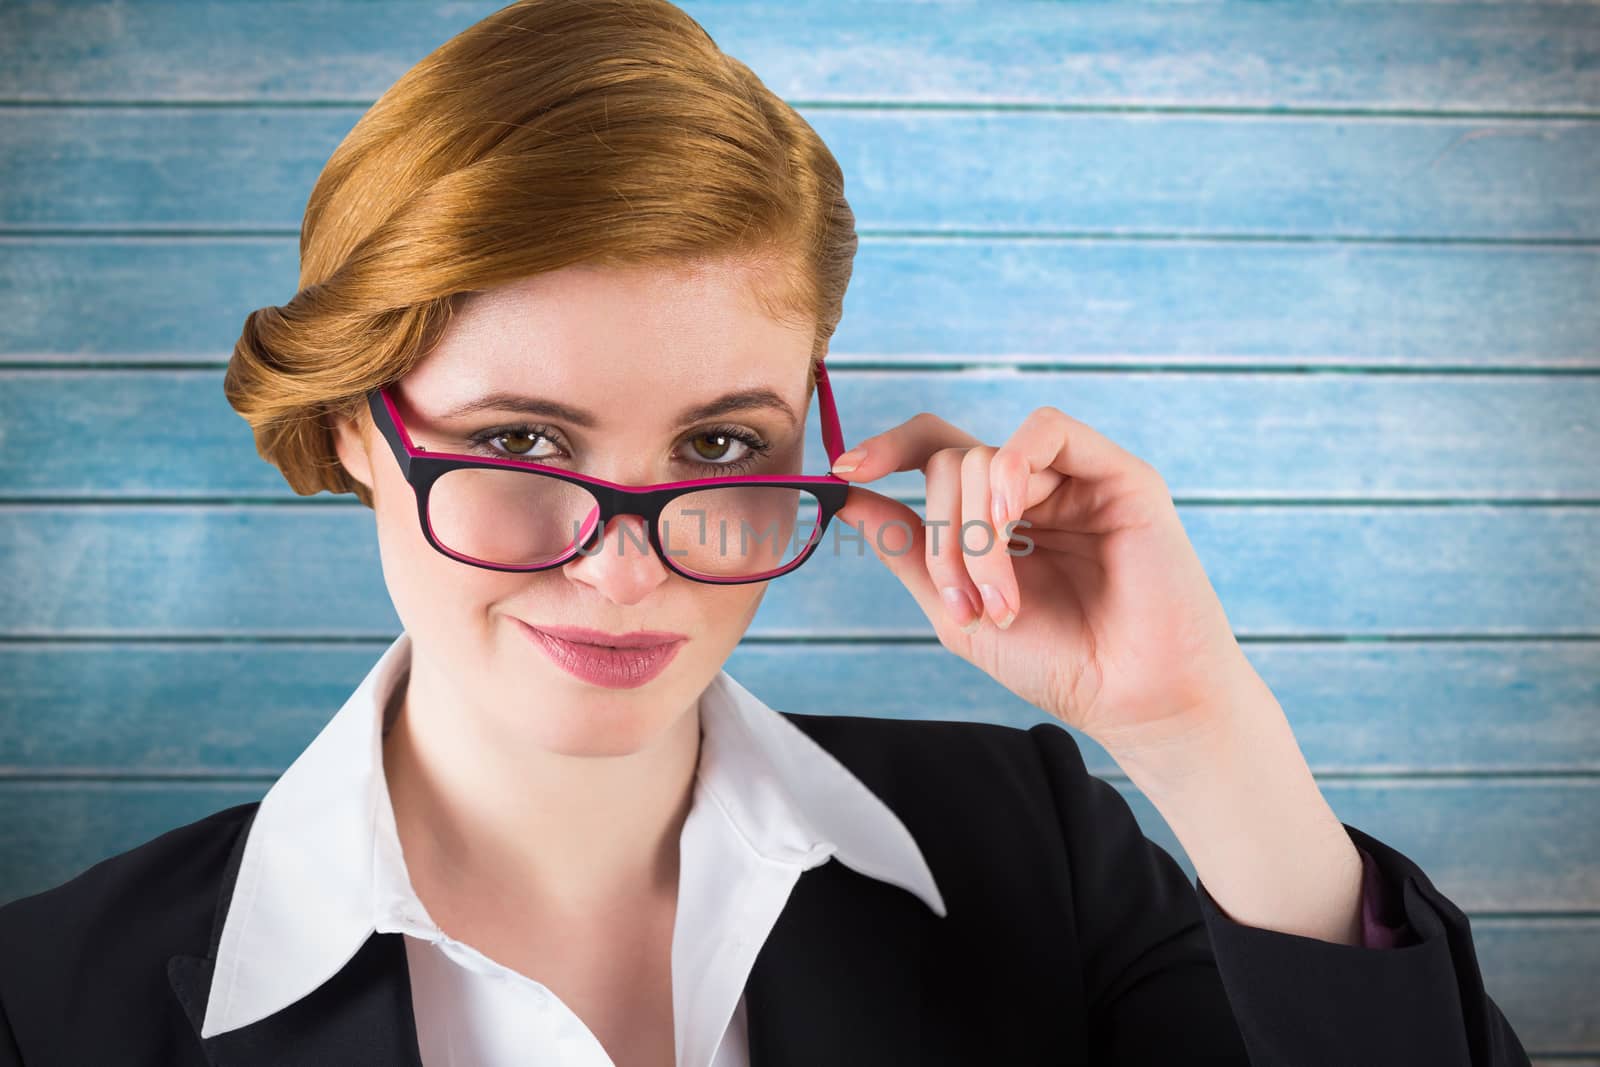 Redhead businesswoman touching her glasses against wooden planks